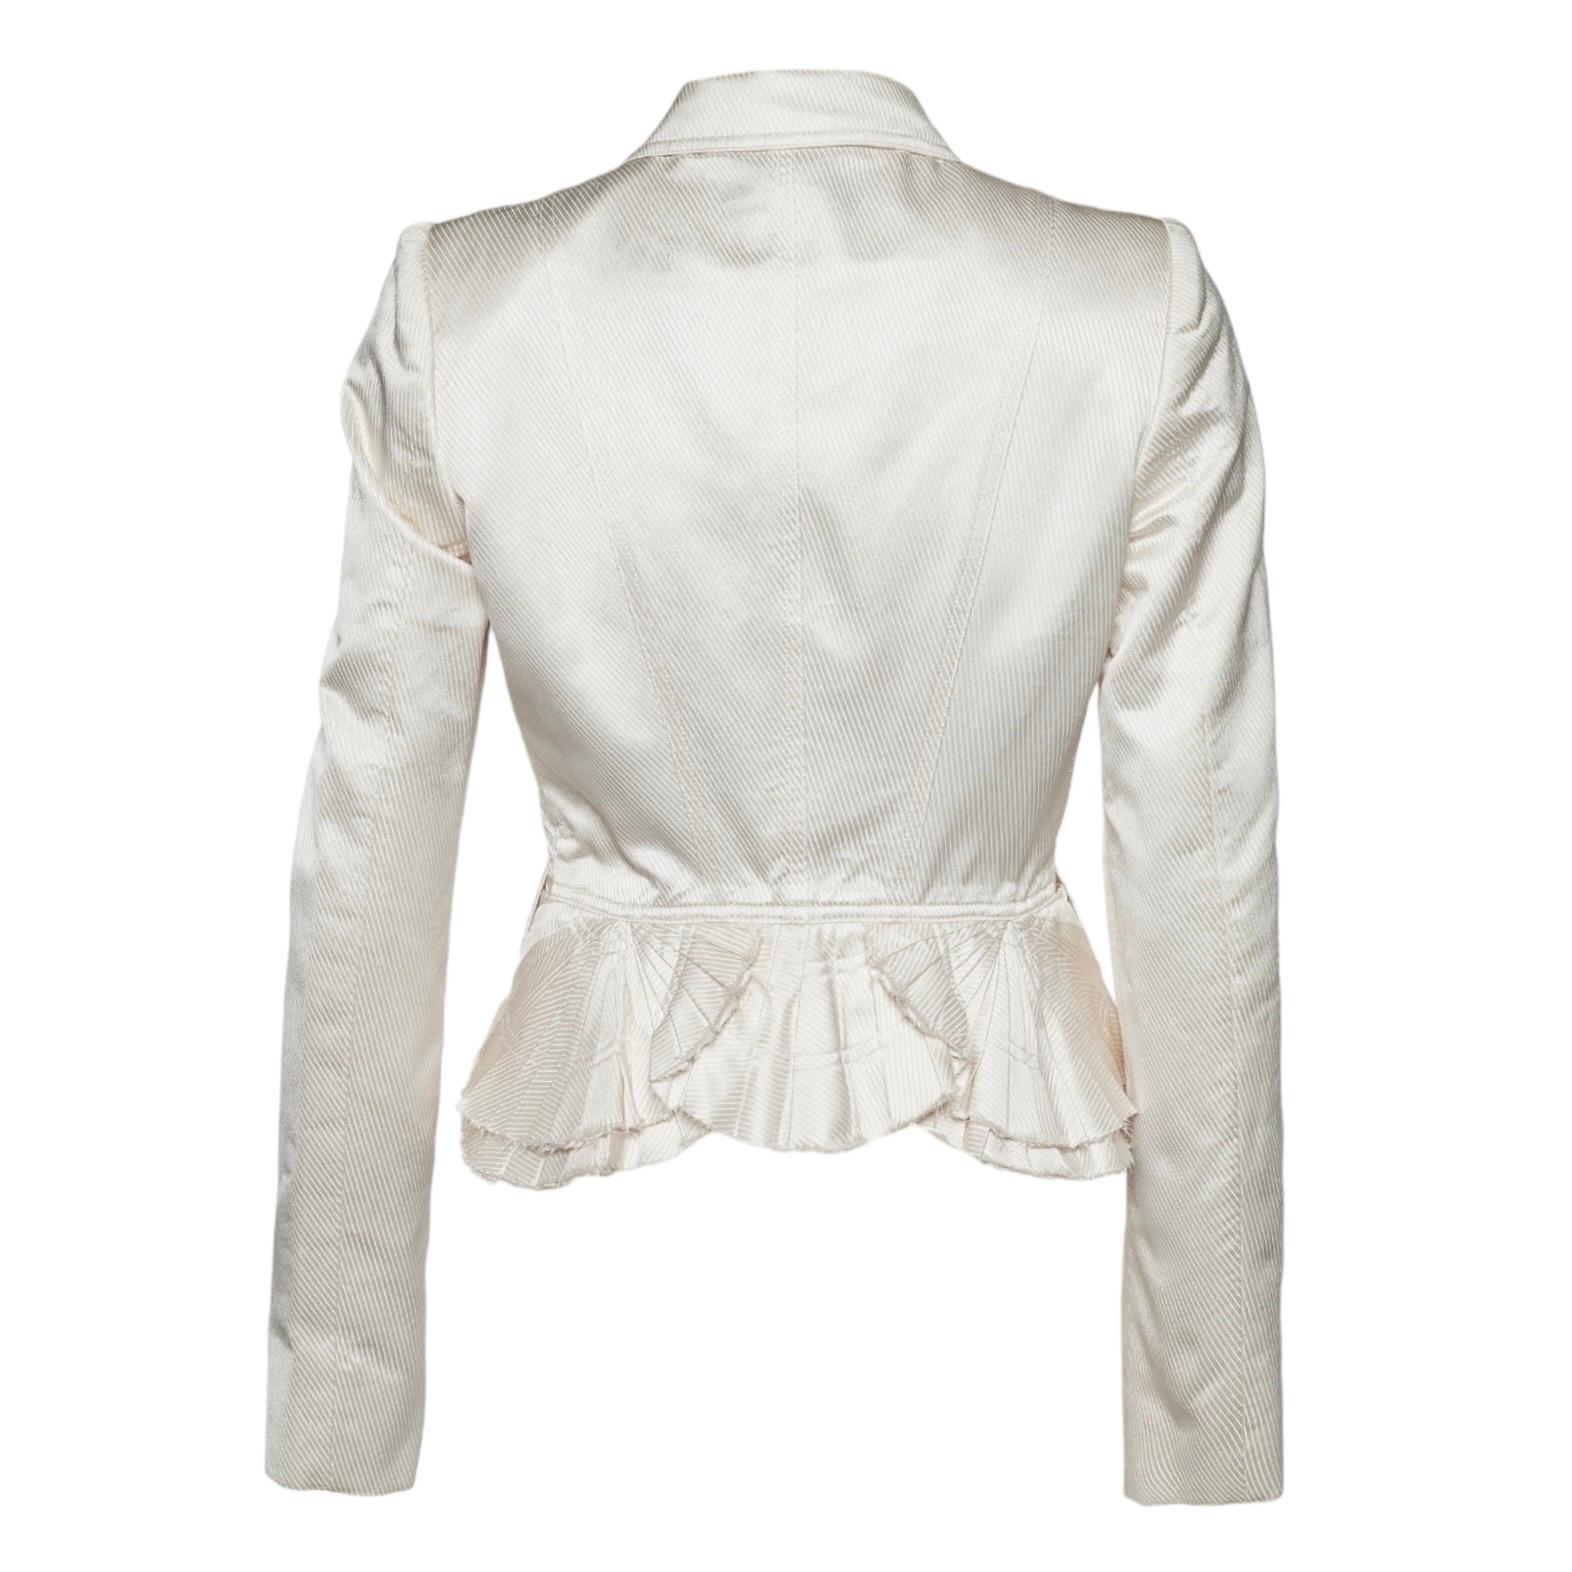 Women's GUCCI BY TOM FORD S/S 2004 Frayed Silk Ensemble Pleated Pants & Jacket Blazer For Sale